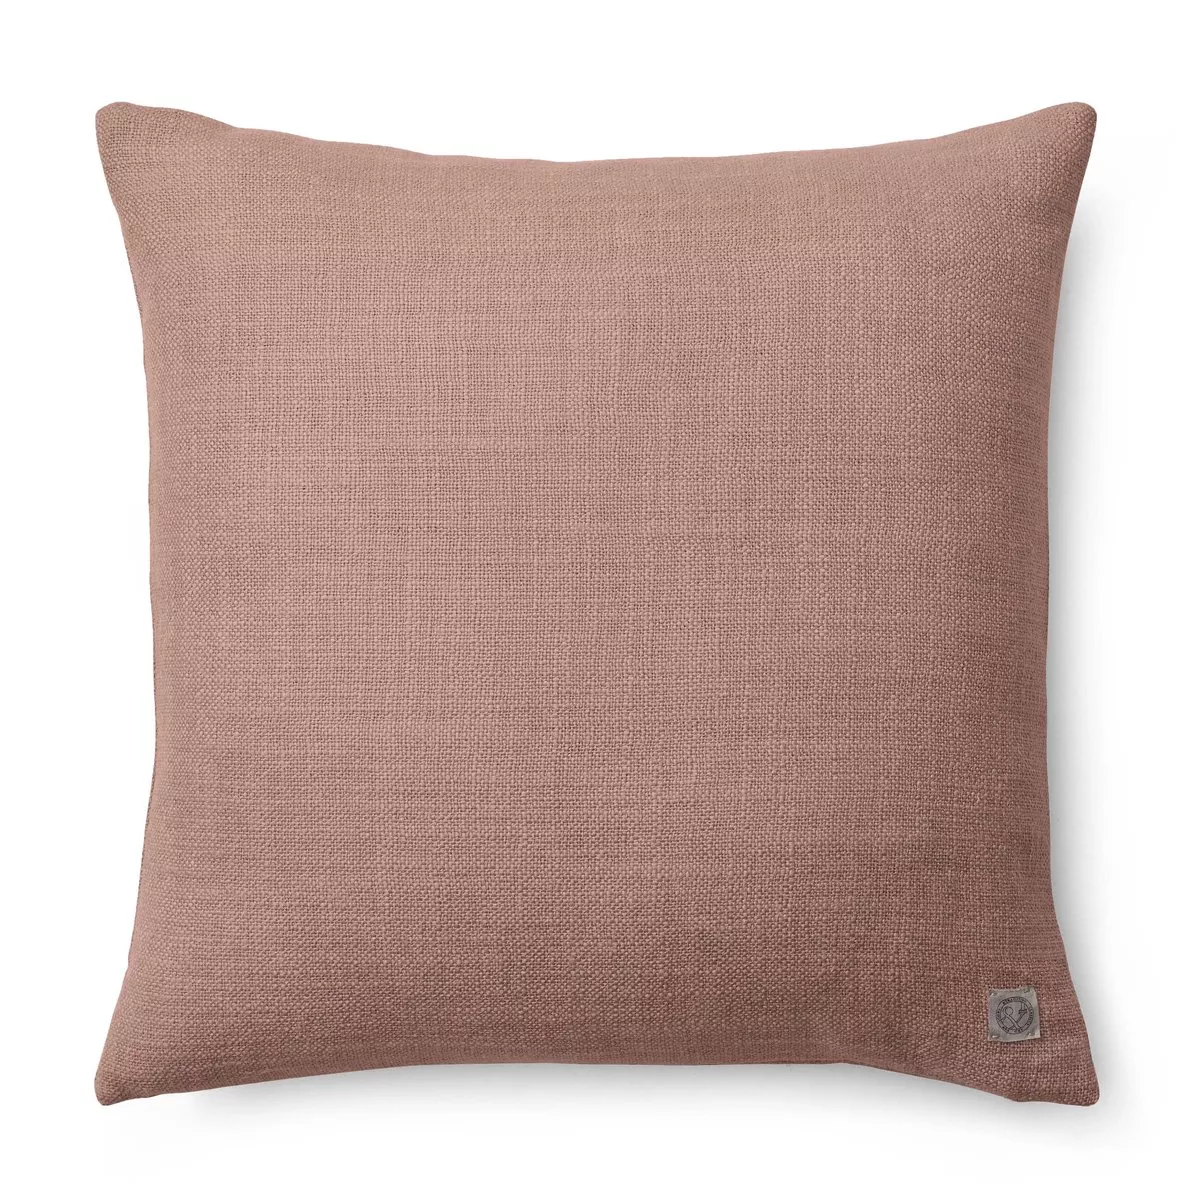 #1 - &Tradition Collect pude SC28 Heavy Linen 50x50 cm Sienna